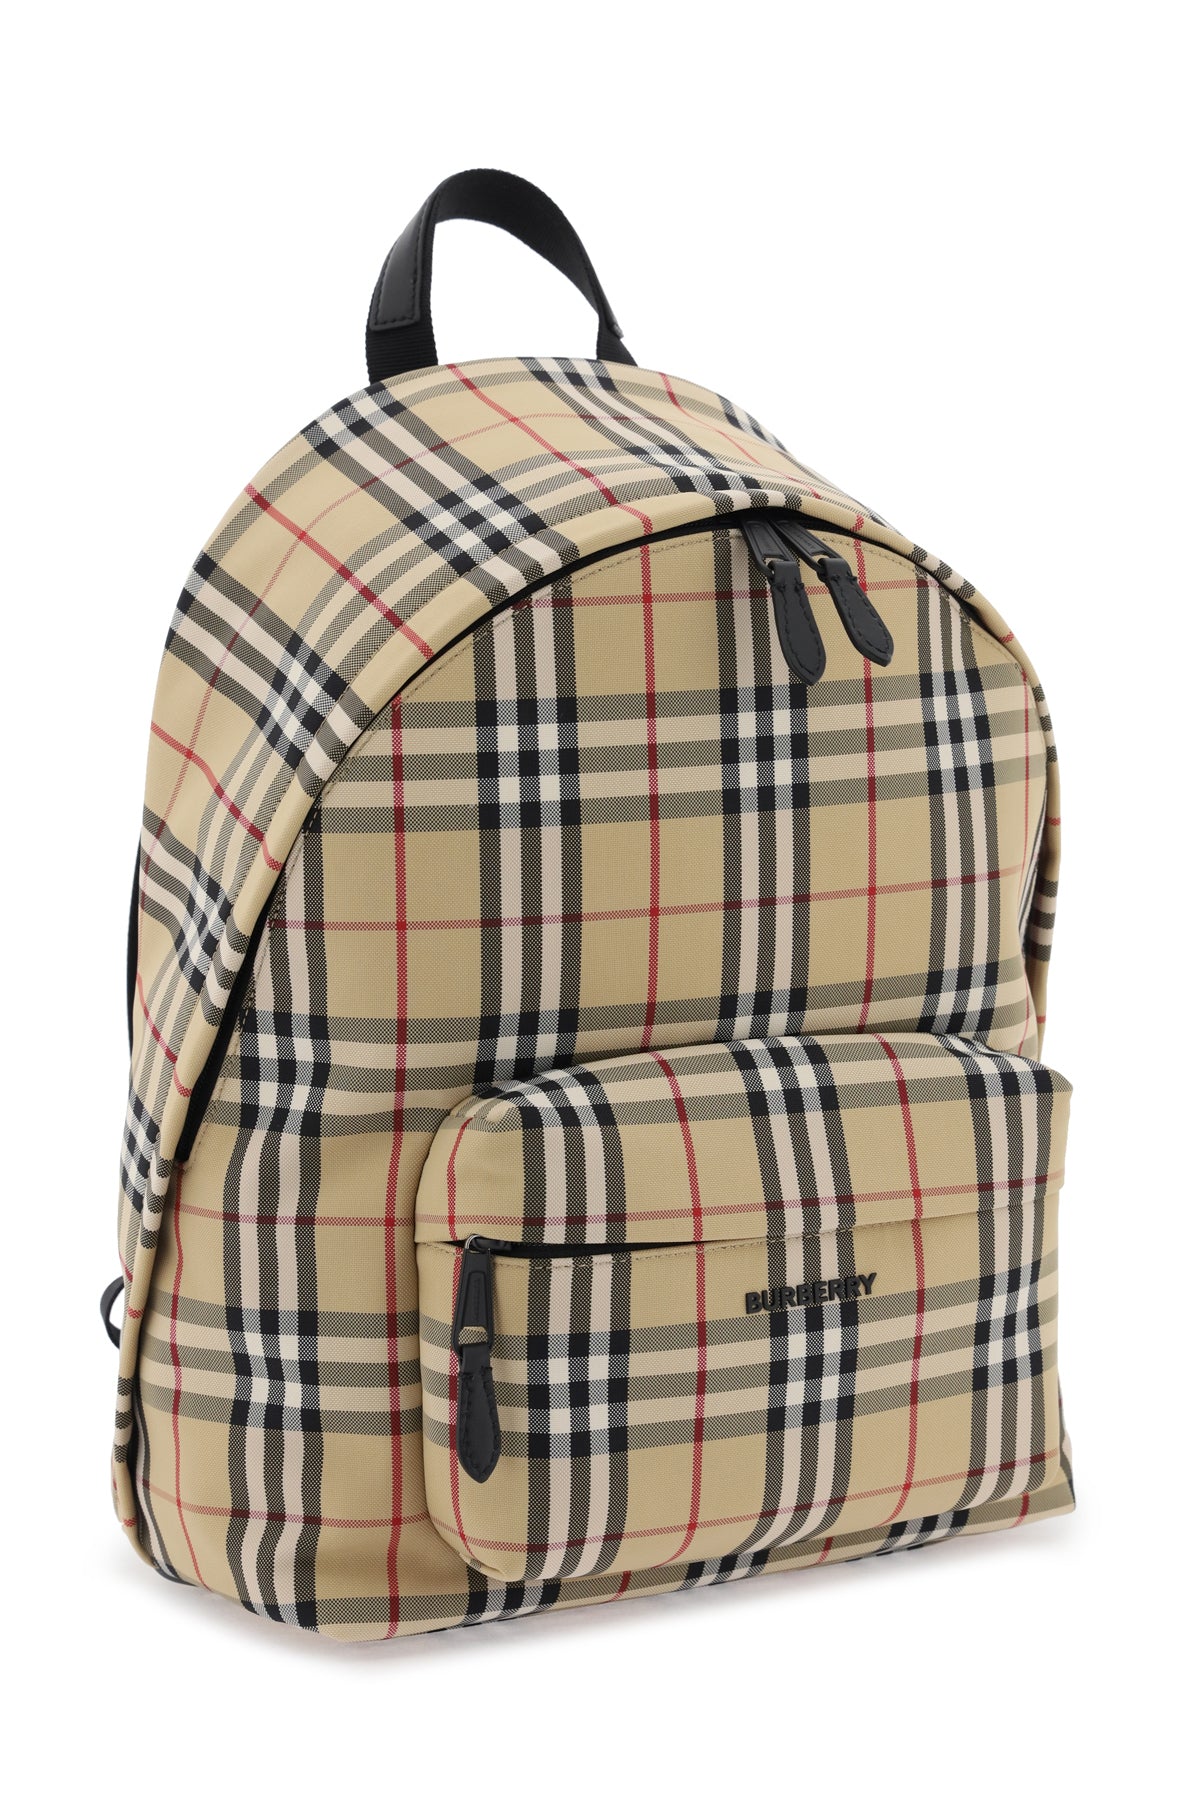 BURBERRY Luxurious Check-Inspired Backpack for Fashionable Men